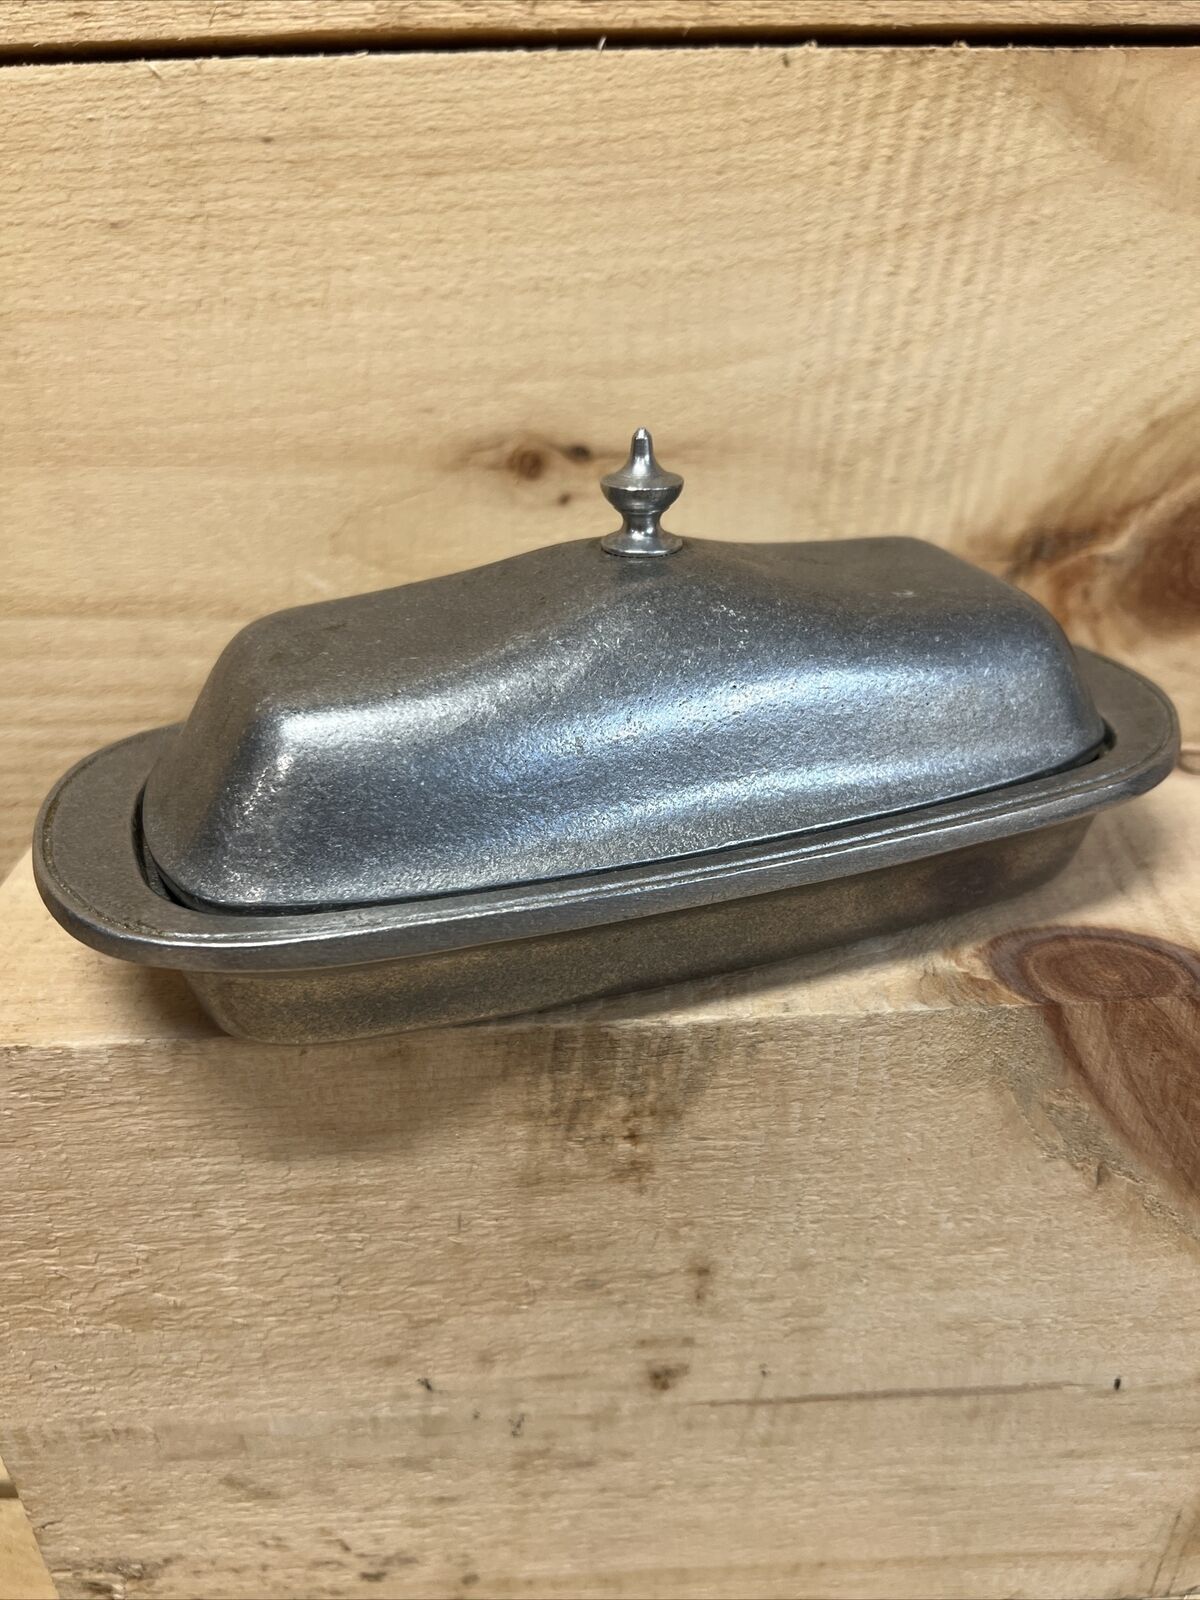 VTG Wilton Armetale Mount Joy Pewter Covered Butter Dish (Made In The USA)